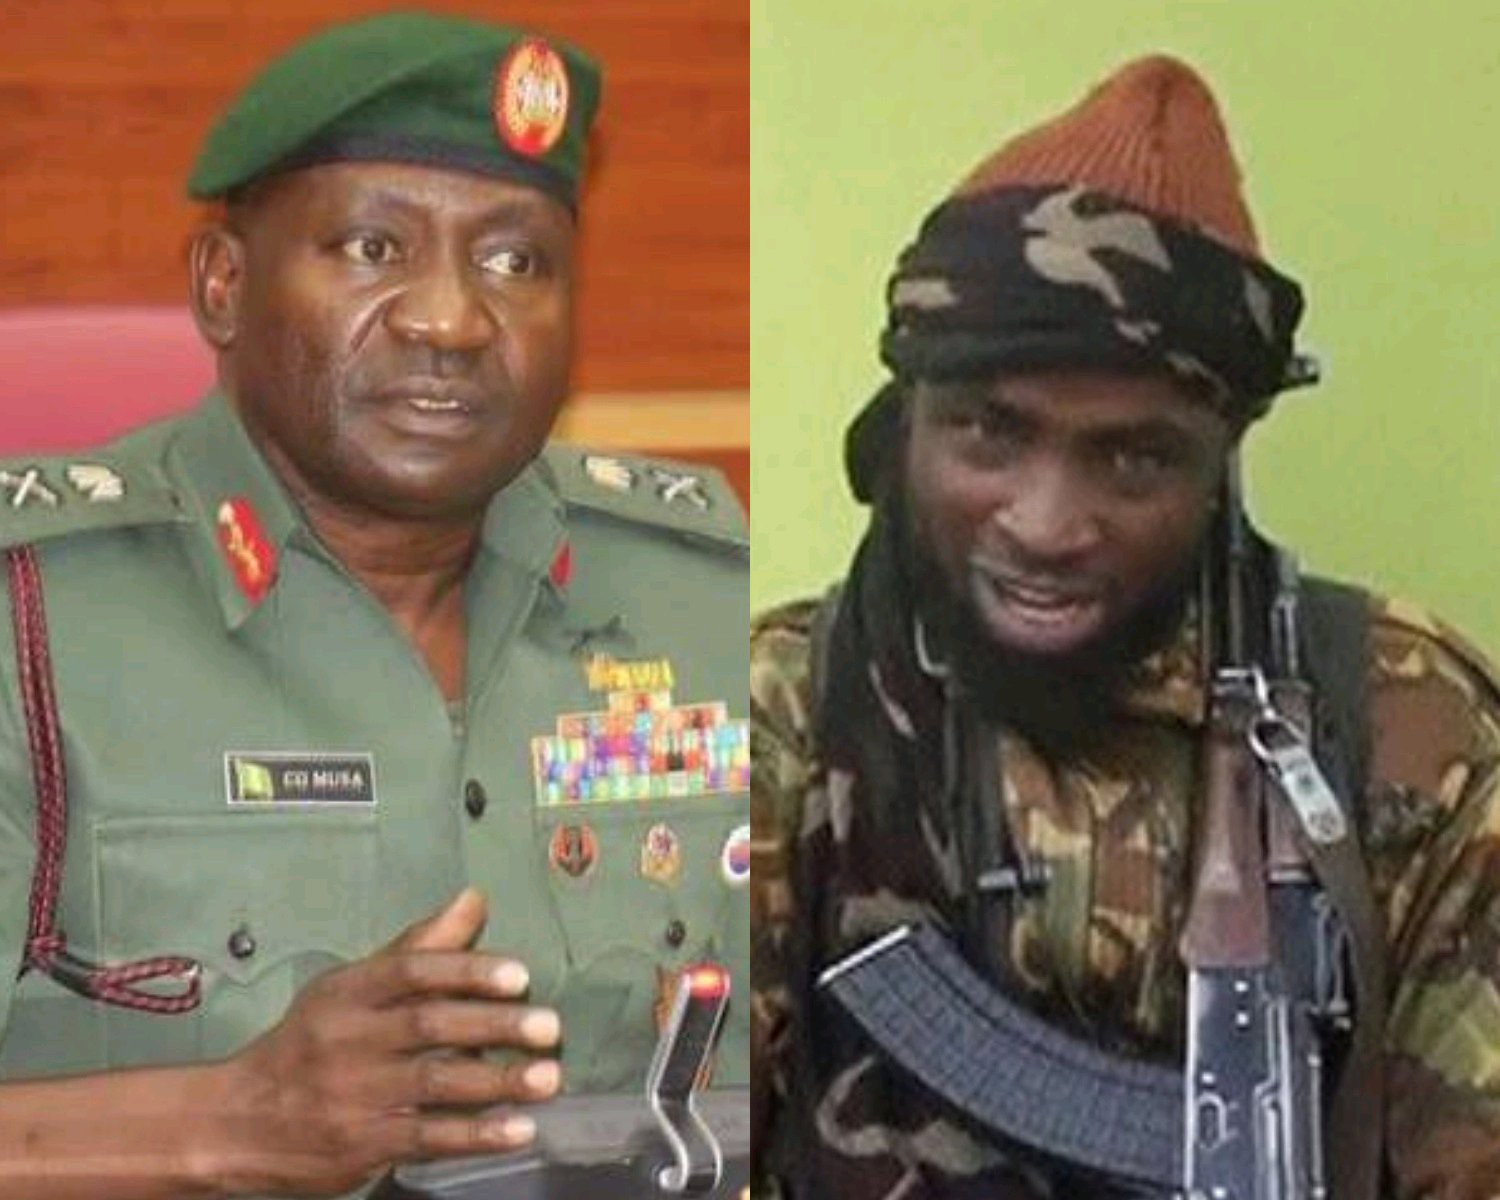 Who'd have thought Shekau would do what he did, he was a petty trader but he turned to monster - According to General Christopher Musa